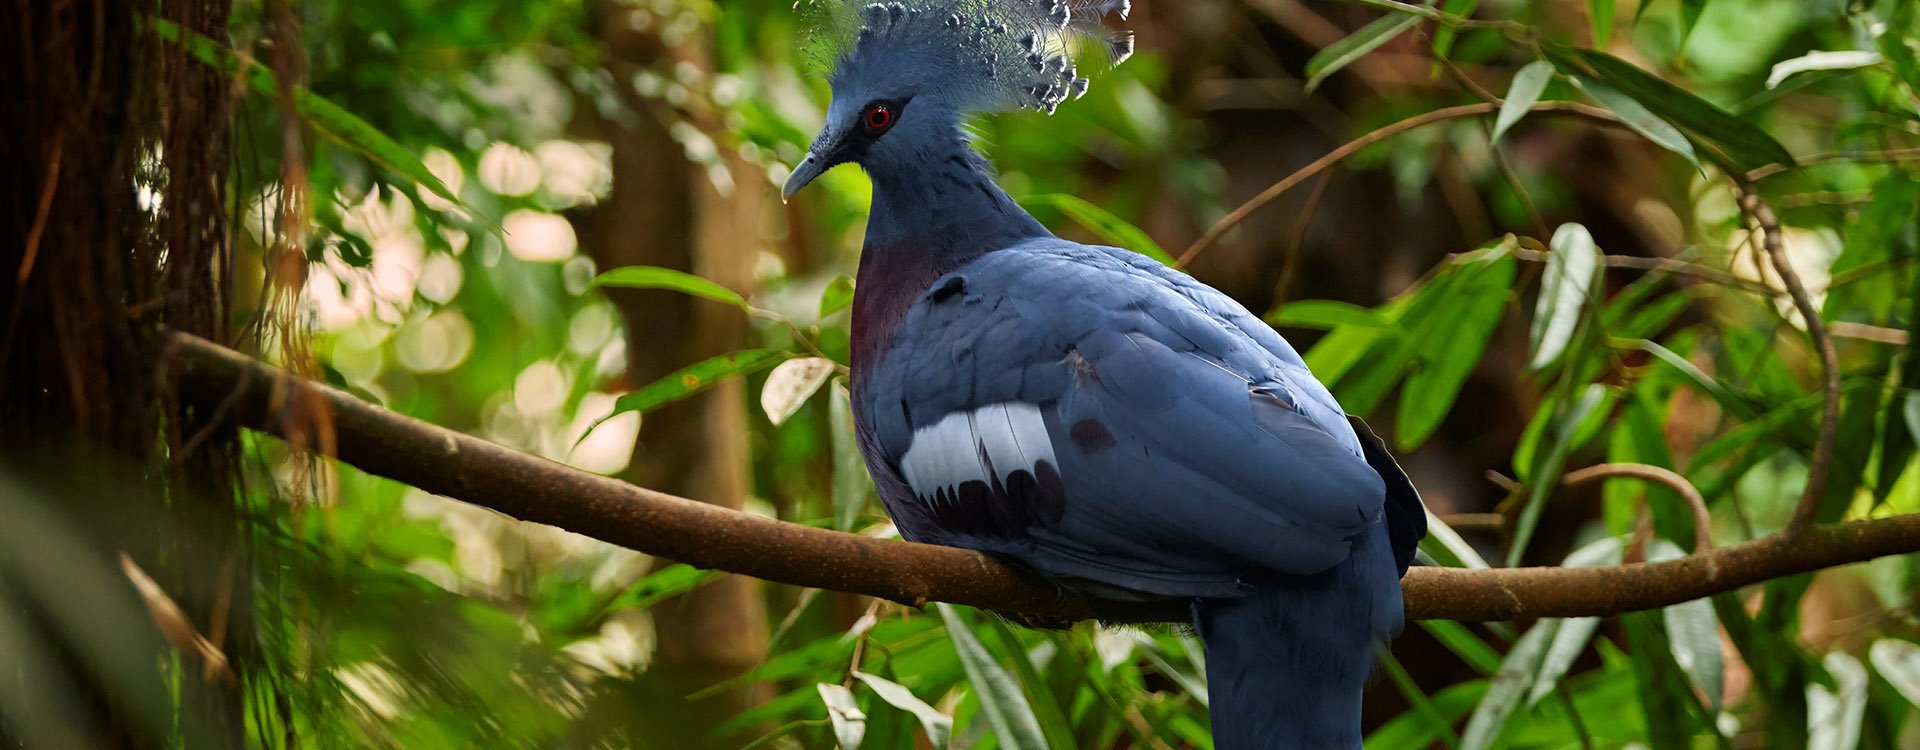 Close-up, largest extant pigeon, Victoria crowned pigeon, Goura victoria. Northern New Guinea